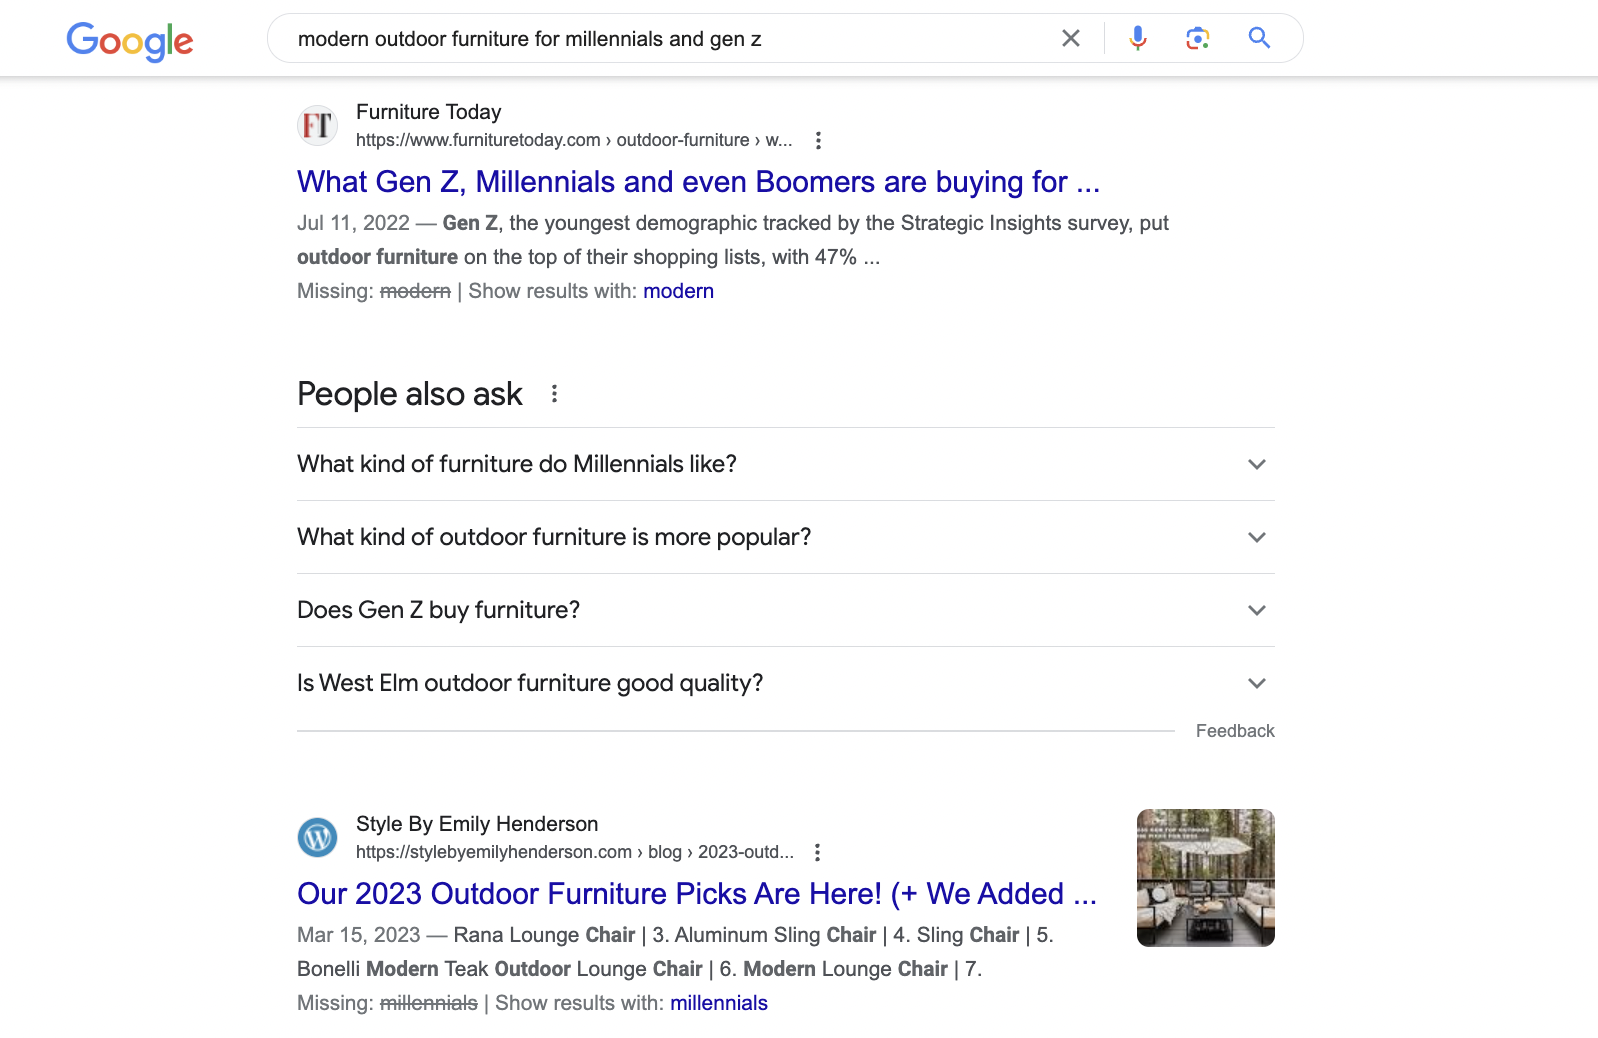 Modern furniture for Millennials and Gen Z search query showcasing "People also ask" on Google